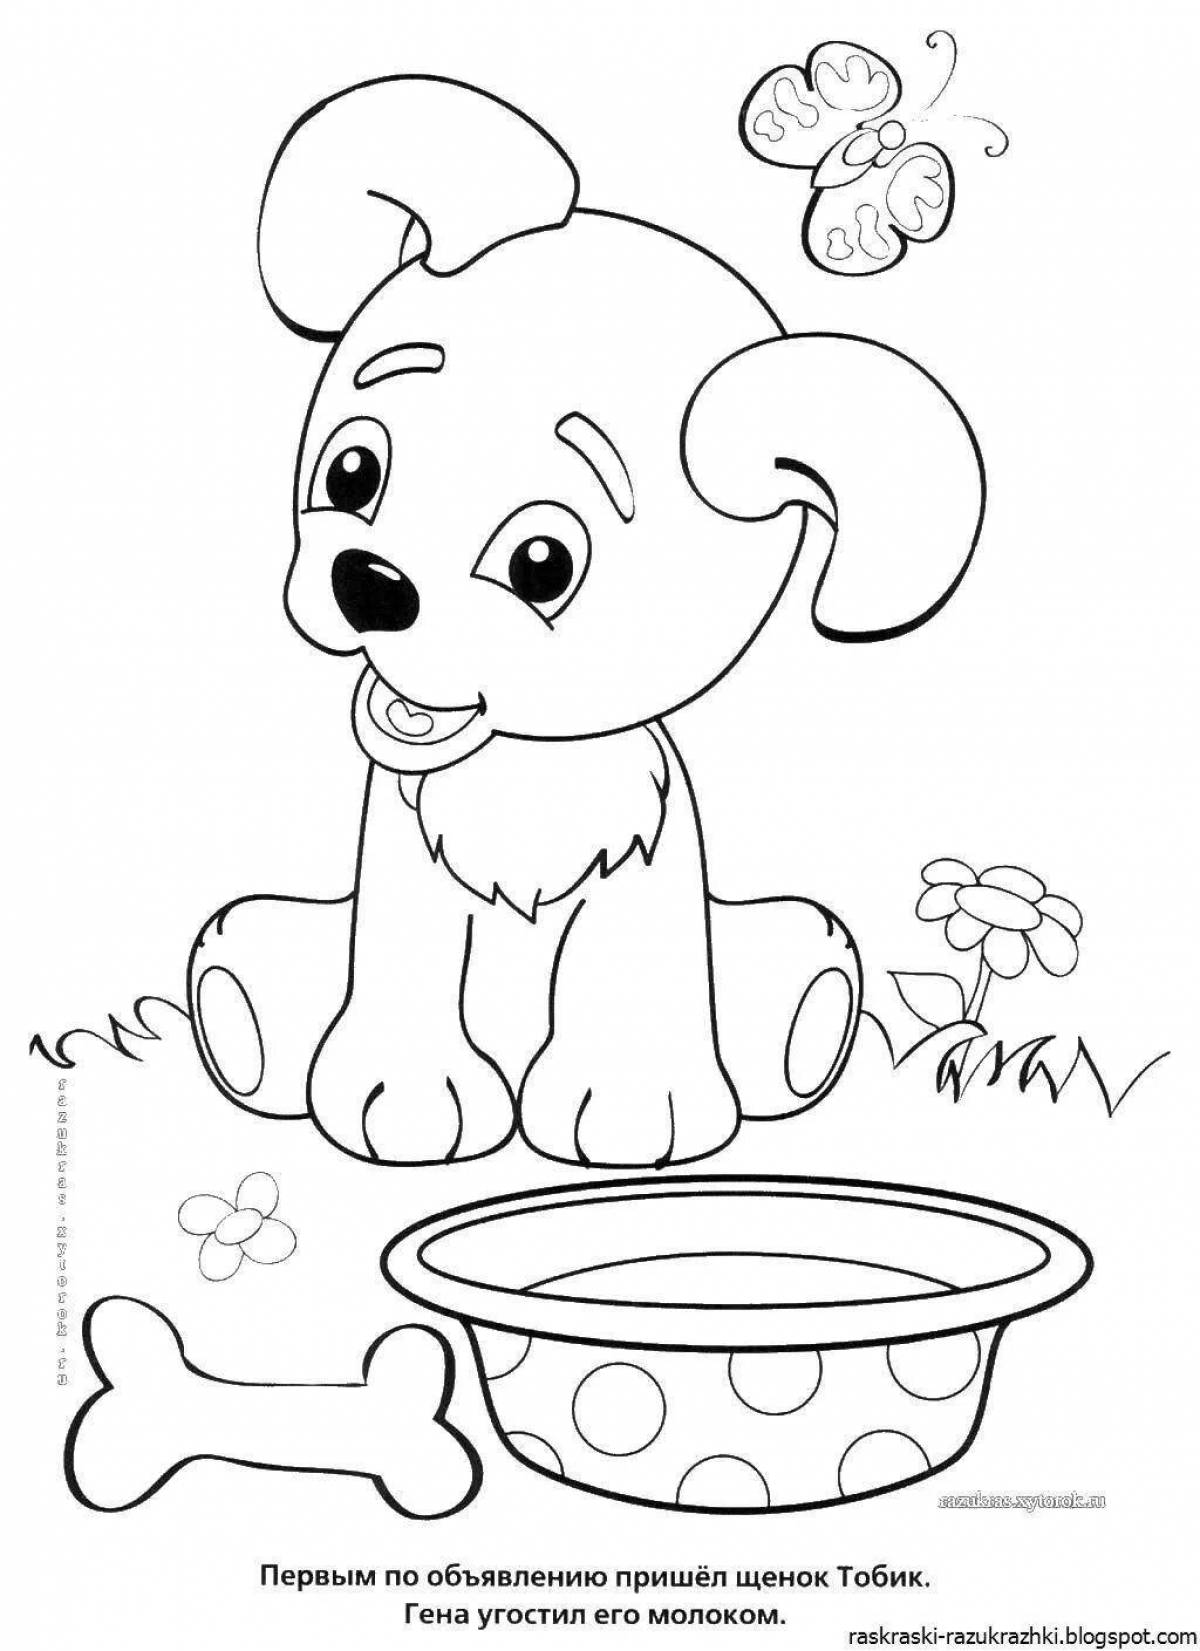 Sweet dog coloring book for children 2-3 years old